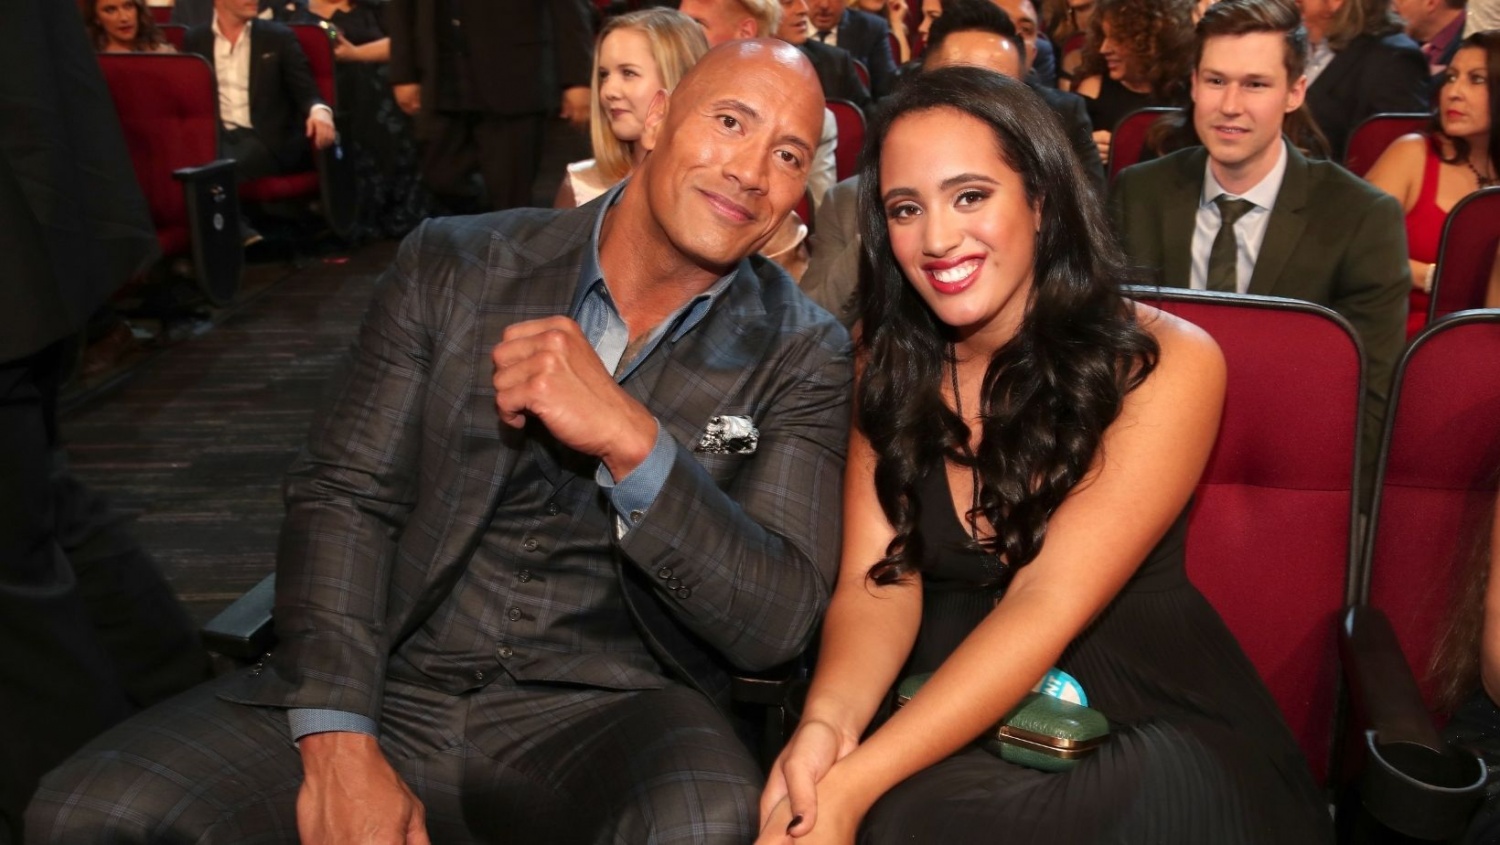 Actor Dwayne Johnson (L) and Simone Alexandra Johnson attend the People's Choice Awards 2017 at Microsoft Theater on January 18, 2017 in Los Angeles, California. (Photo by Christopher Polk/Getty Images for People's Choice Awards)